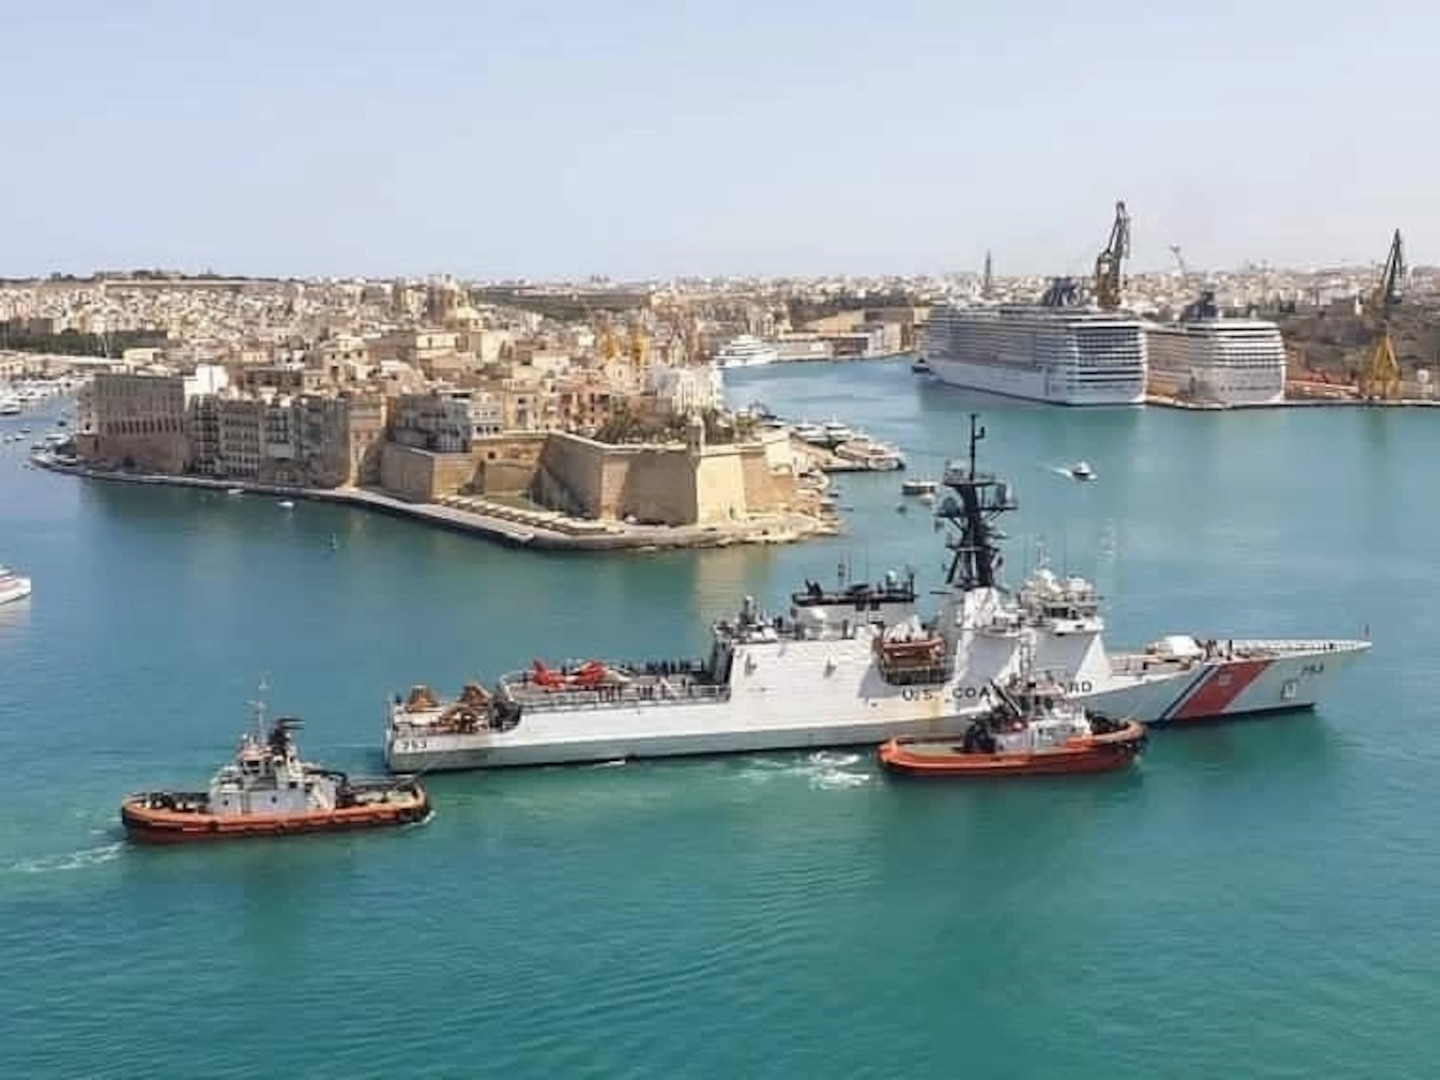 The Coast Guard Cutter Hamilton is conducting a port visit in Valletta, Malta, May 17-20, 2021, following at sea engagements with the armed forces of Malta in the Mediterranean Sea. (Courtesy photo)